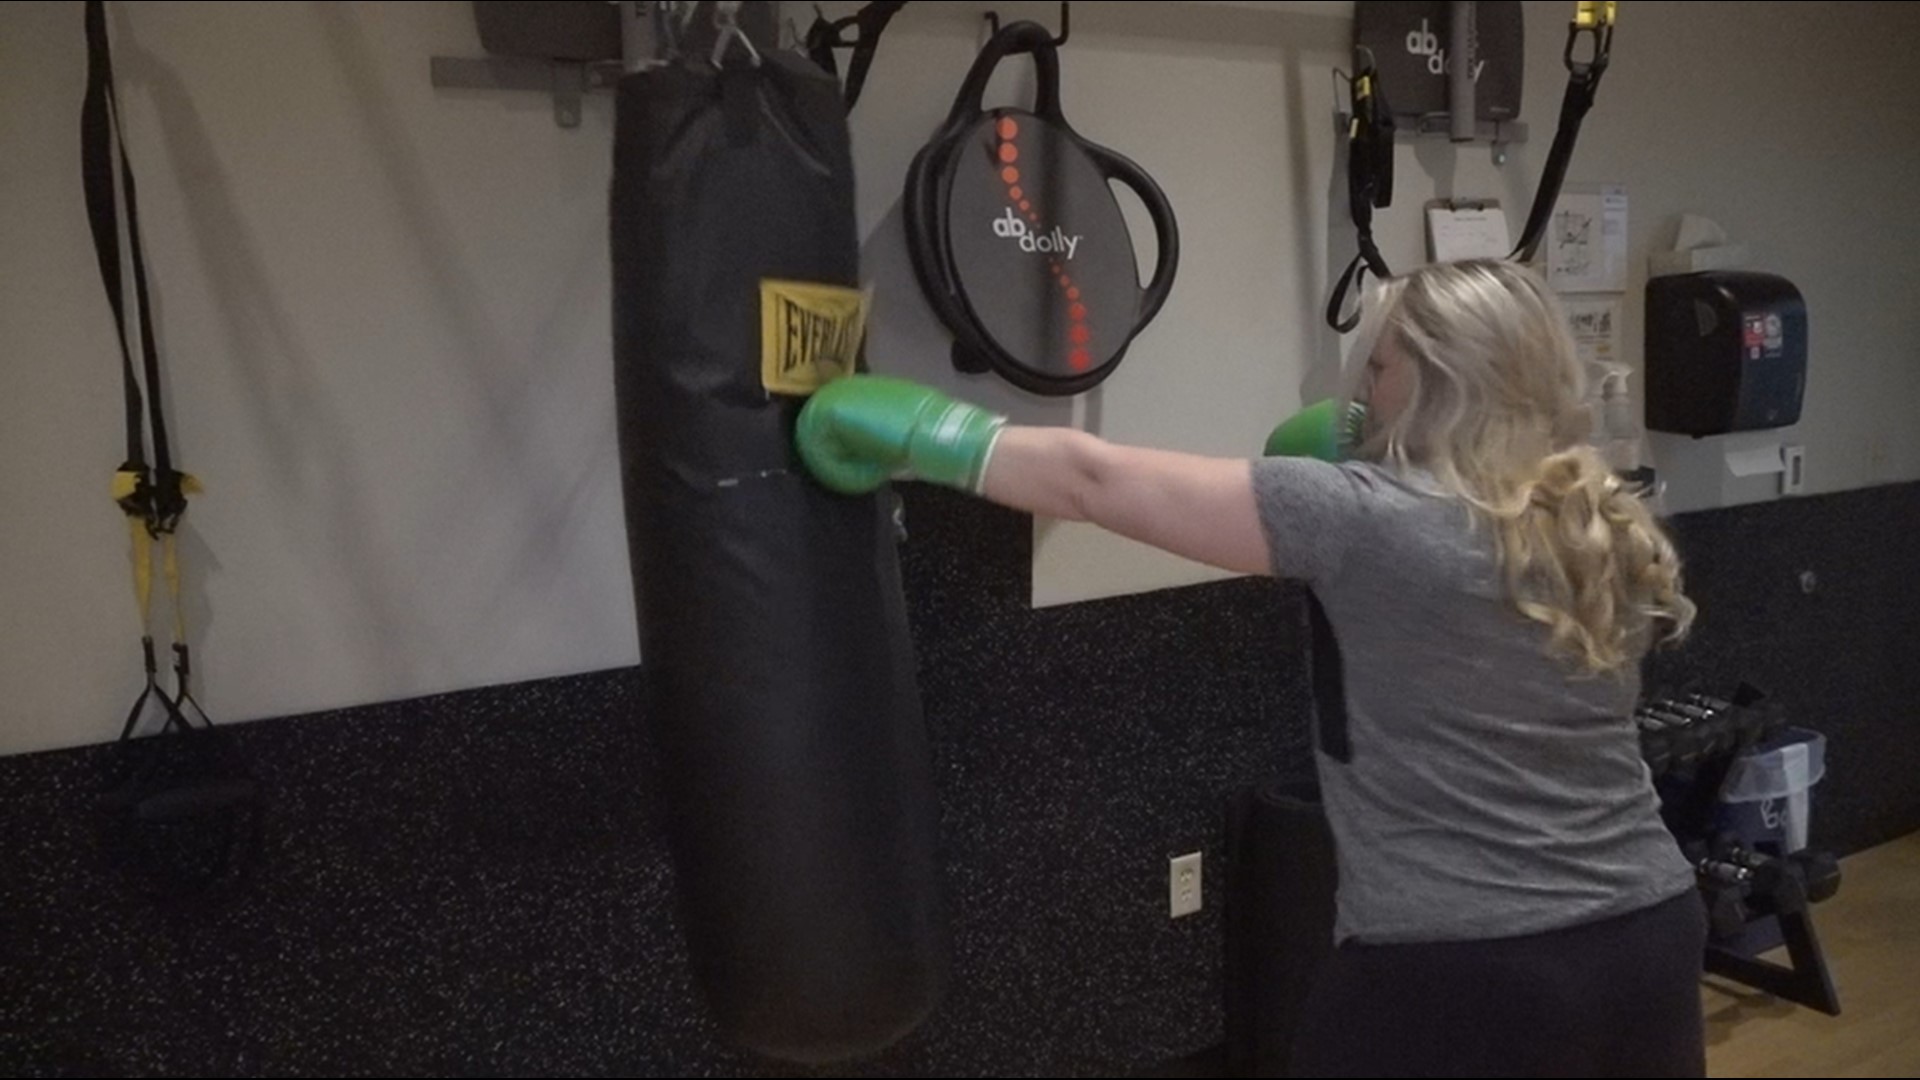 Cardio and stress relief are two big benefits for including boxing in your workouts! Check out these three introduction punches in this week's FOX43 FitMinute.